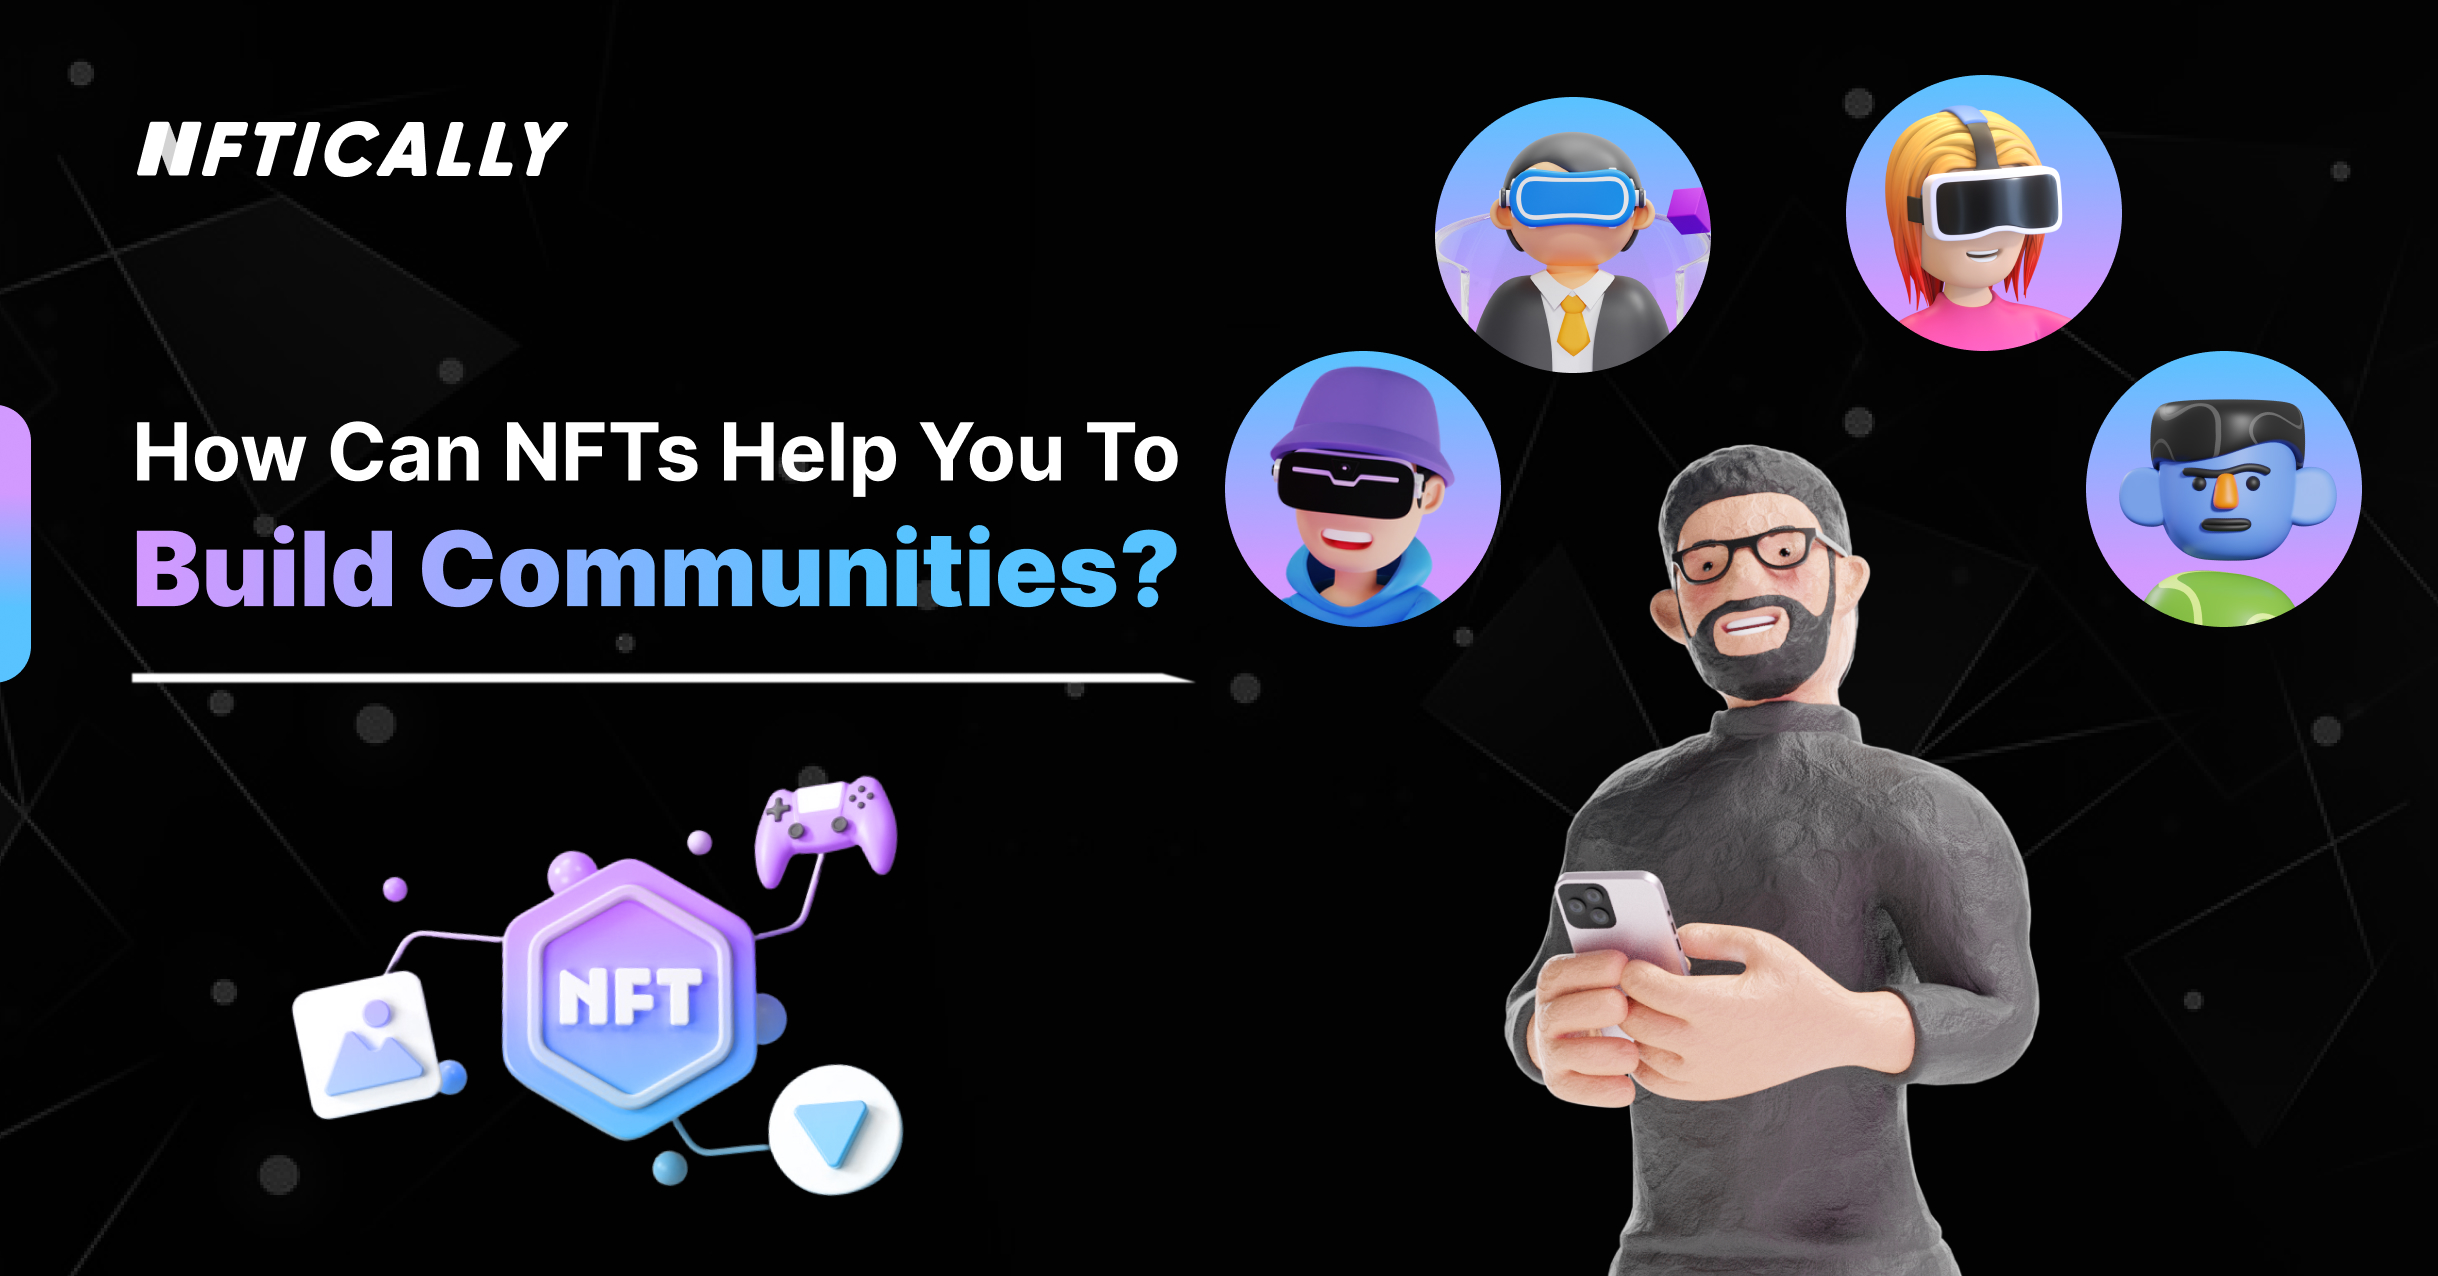 How can NFTs help you to build communities?